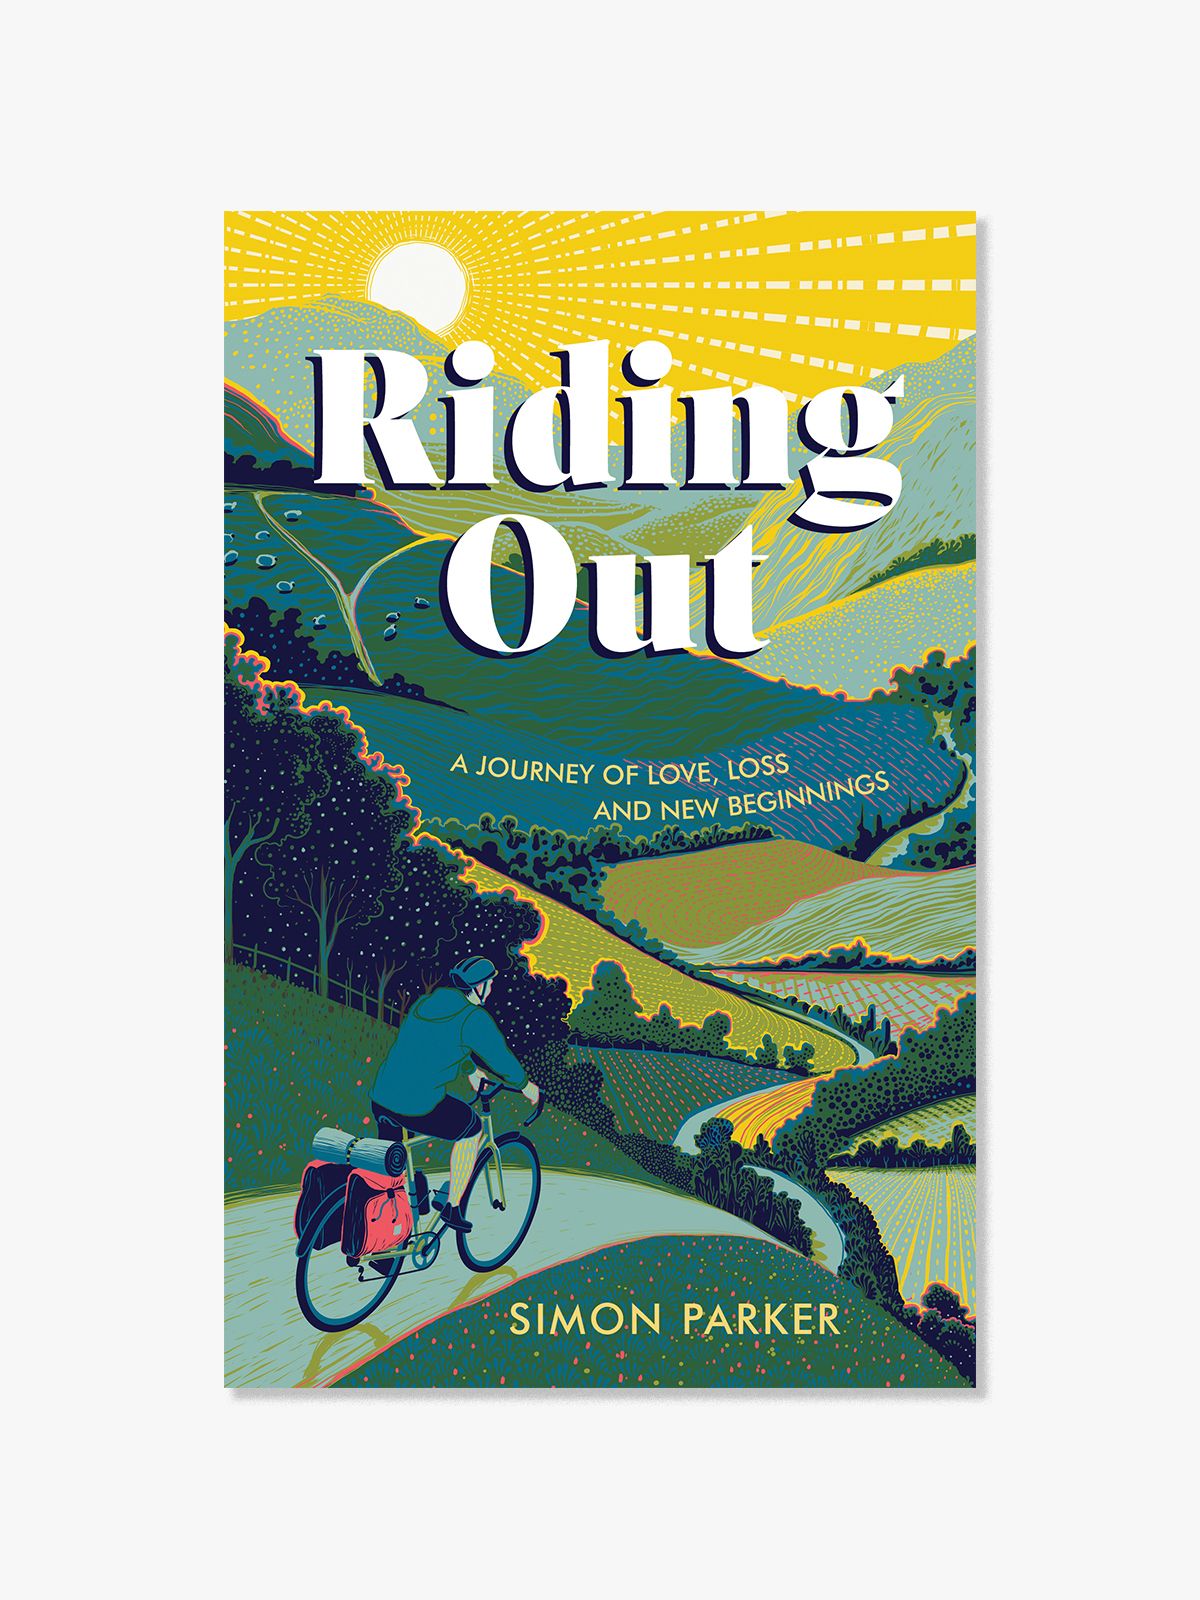  Riding Out book by Simon Parker